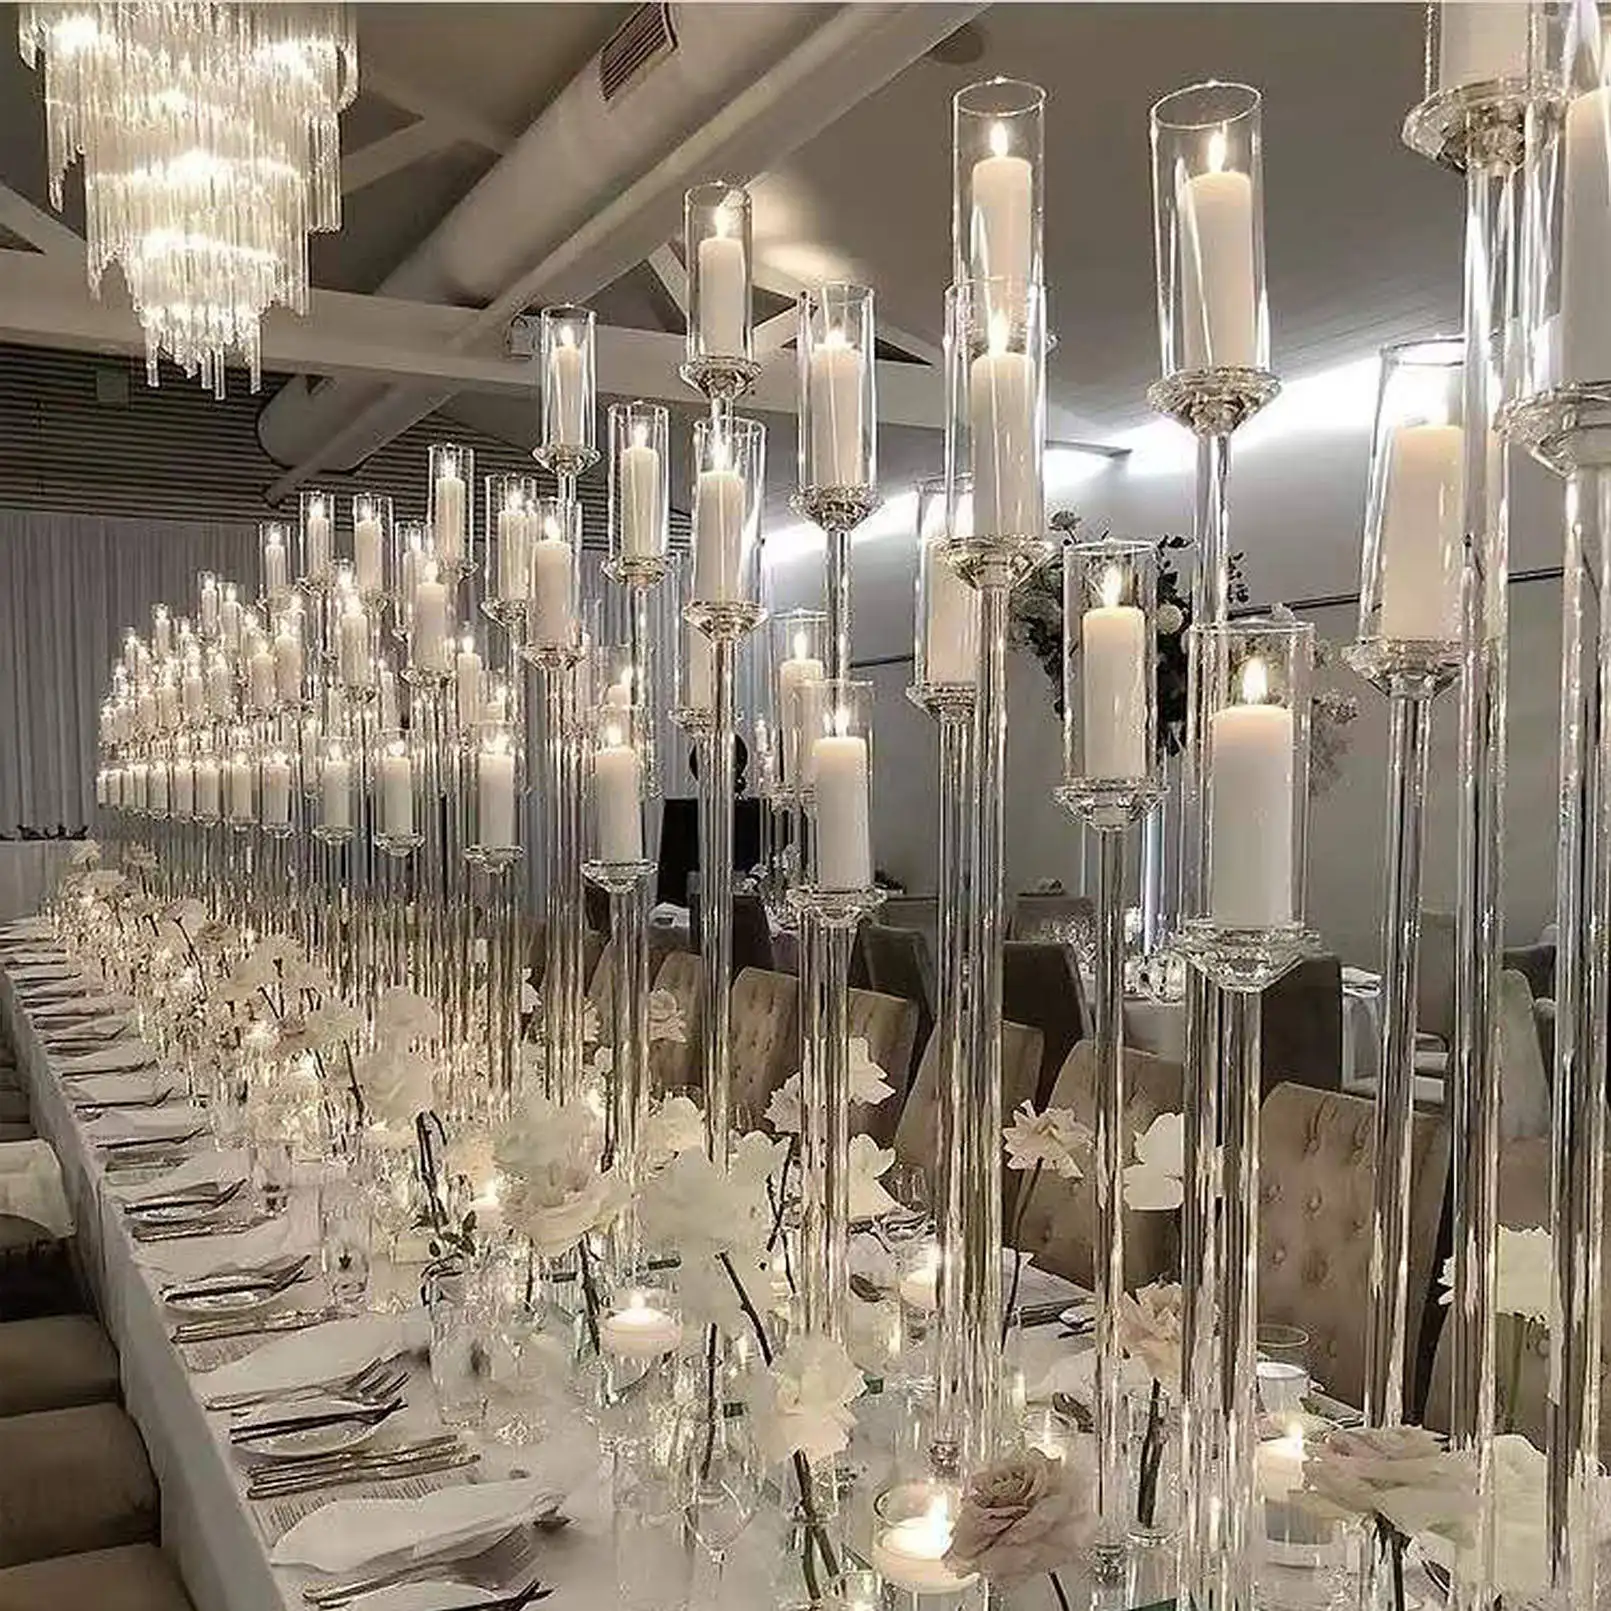 Other Wedding Centerpieces Crystal 8 Arm Candlestick Floor Clear Candelabra Tall Acrylic Candle Holders For Table Decorations